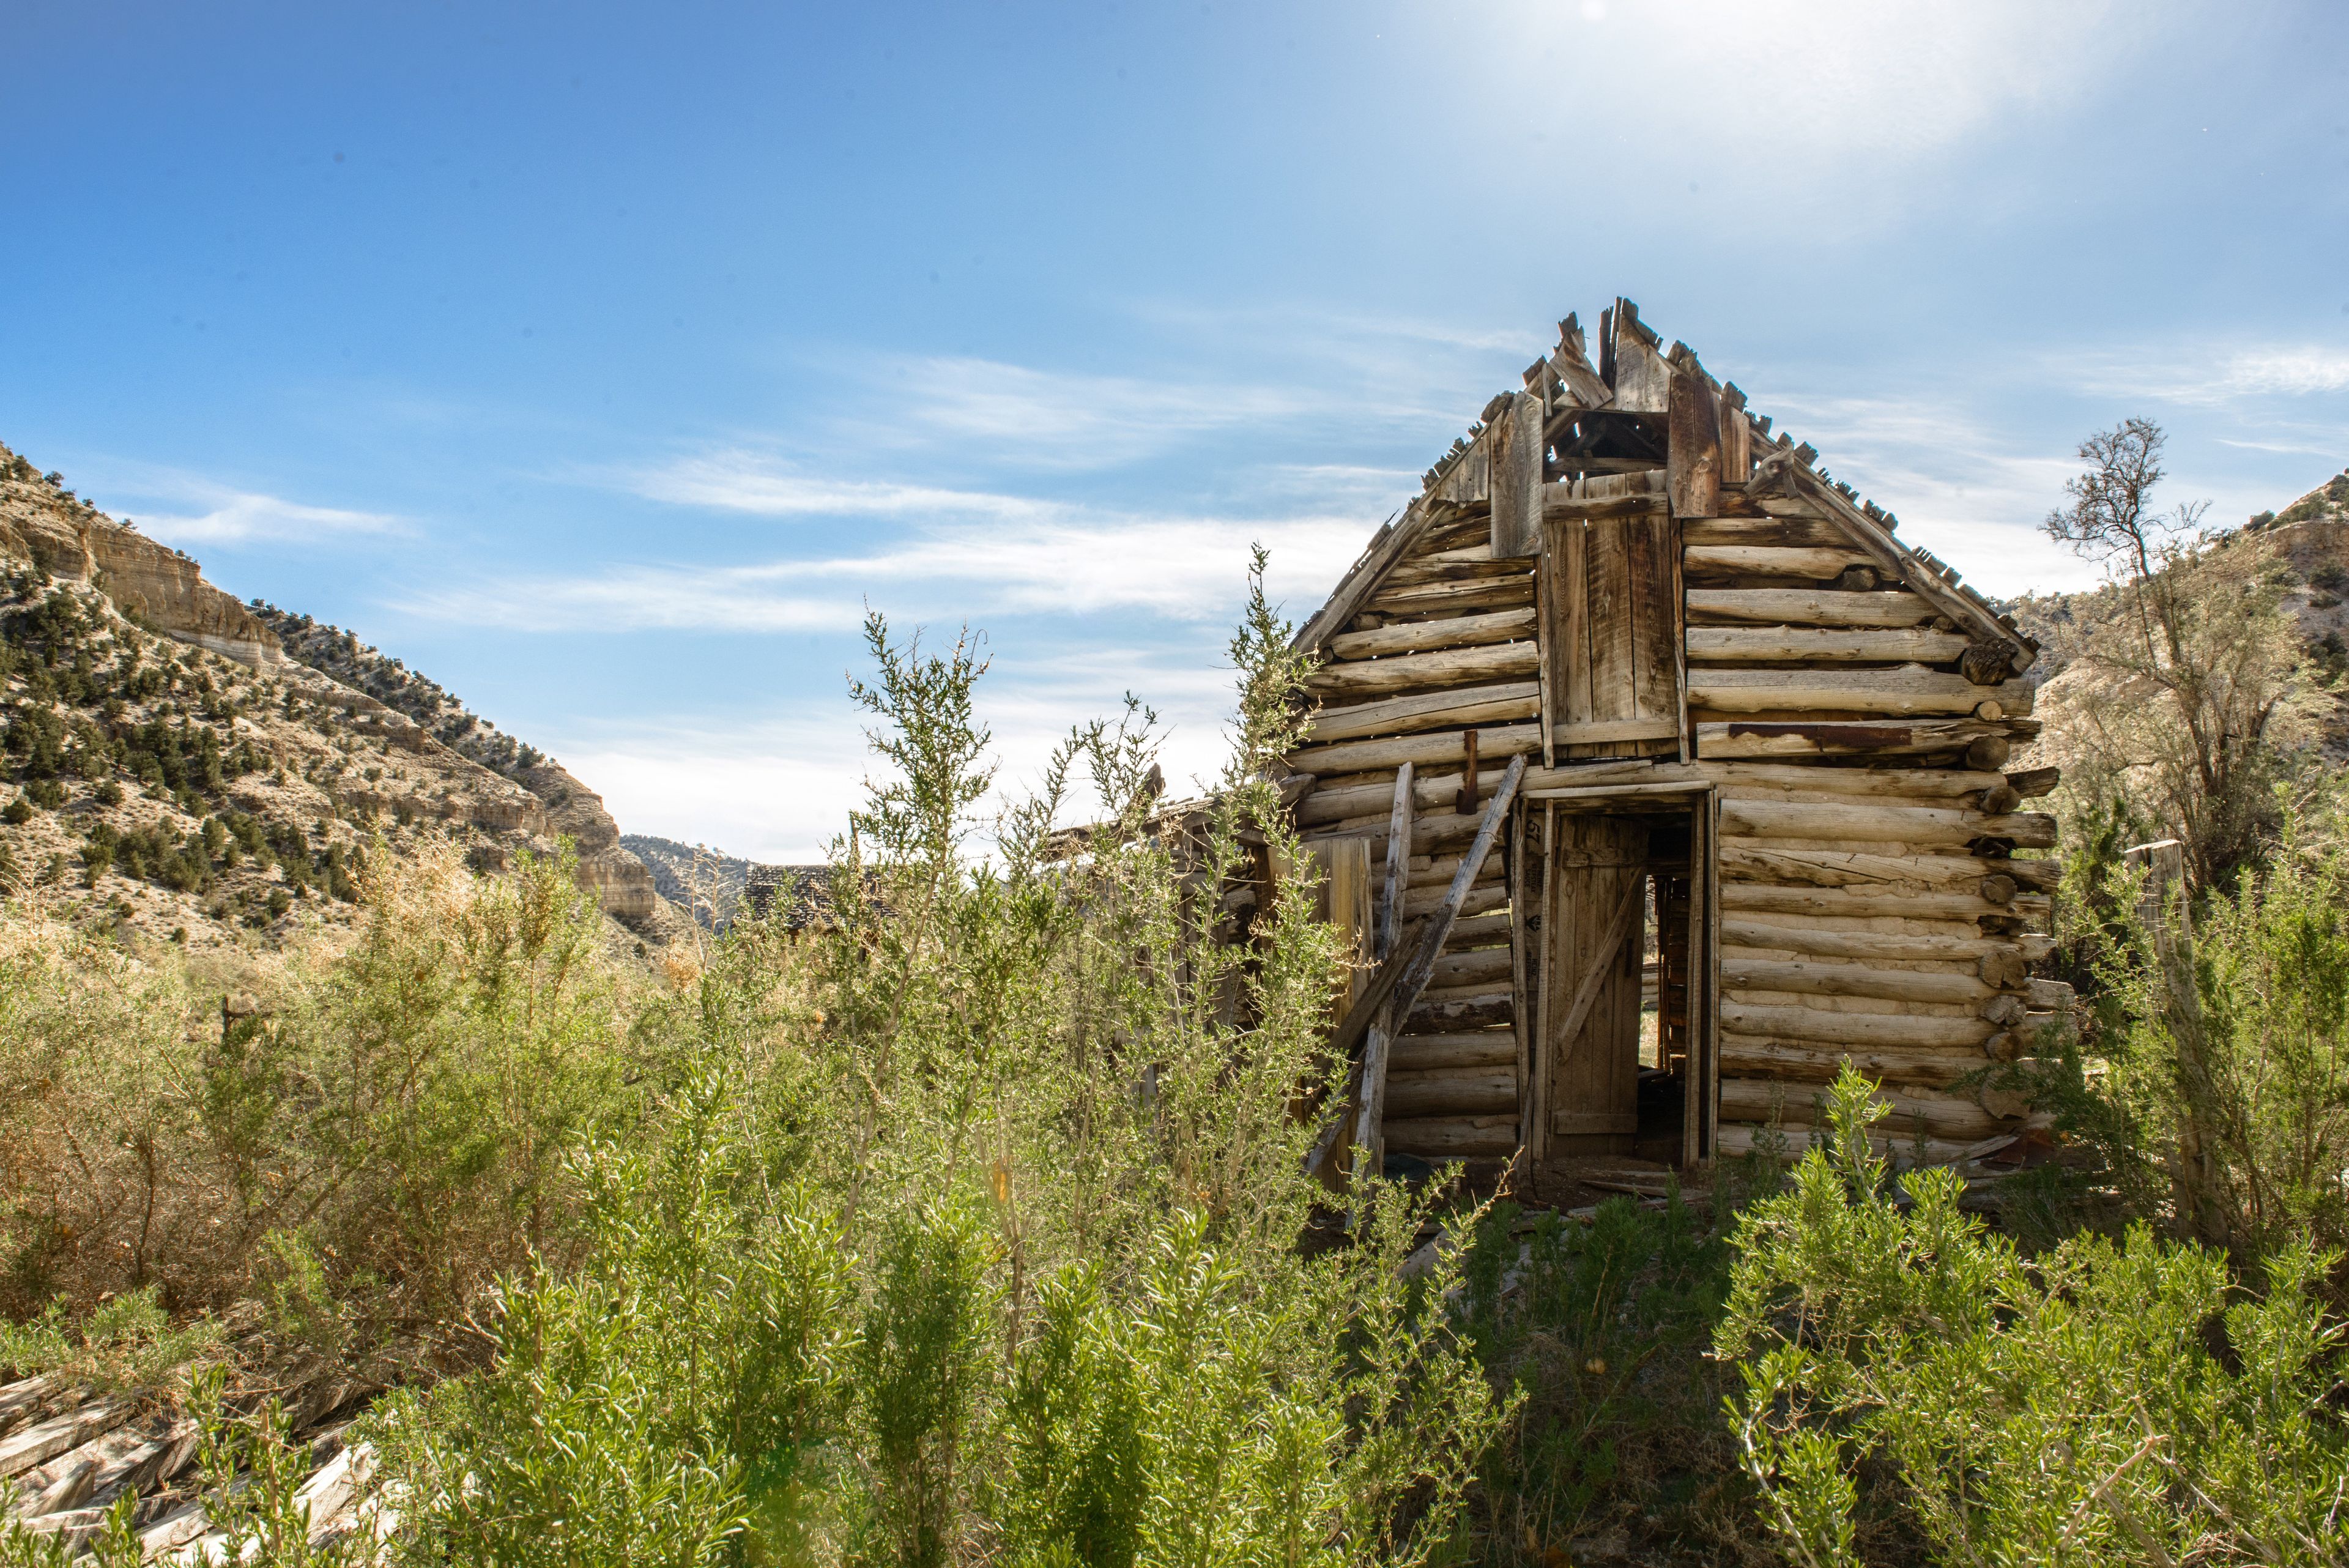 An old, decaying cabin on a desert mountain.